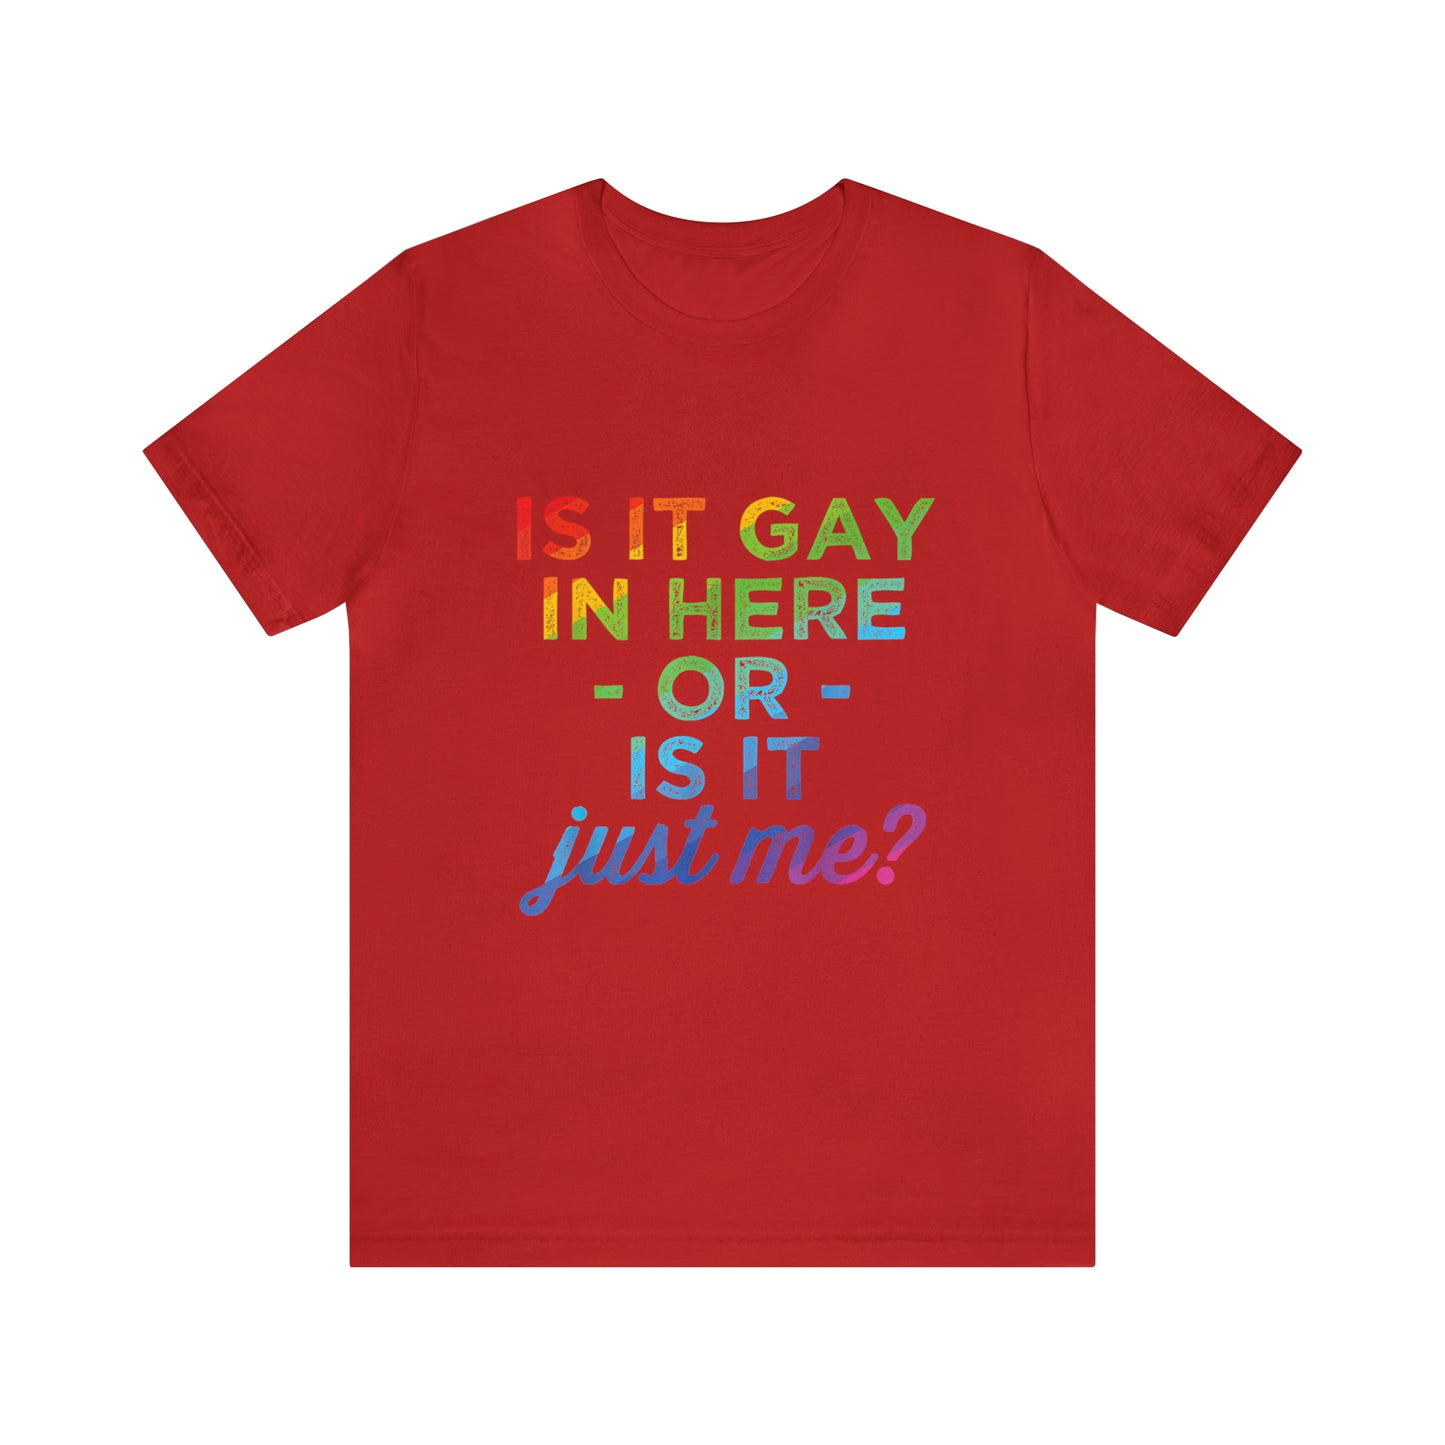 Is It Gay In Here Or Is It Just Me 2 - Unisex T-Shirt